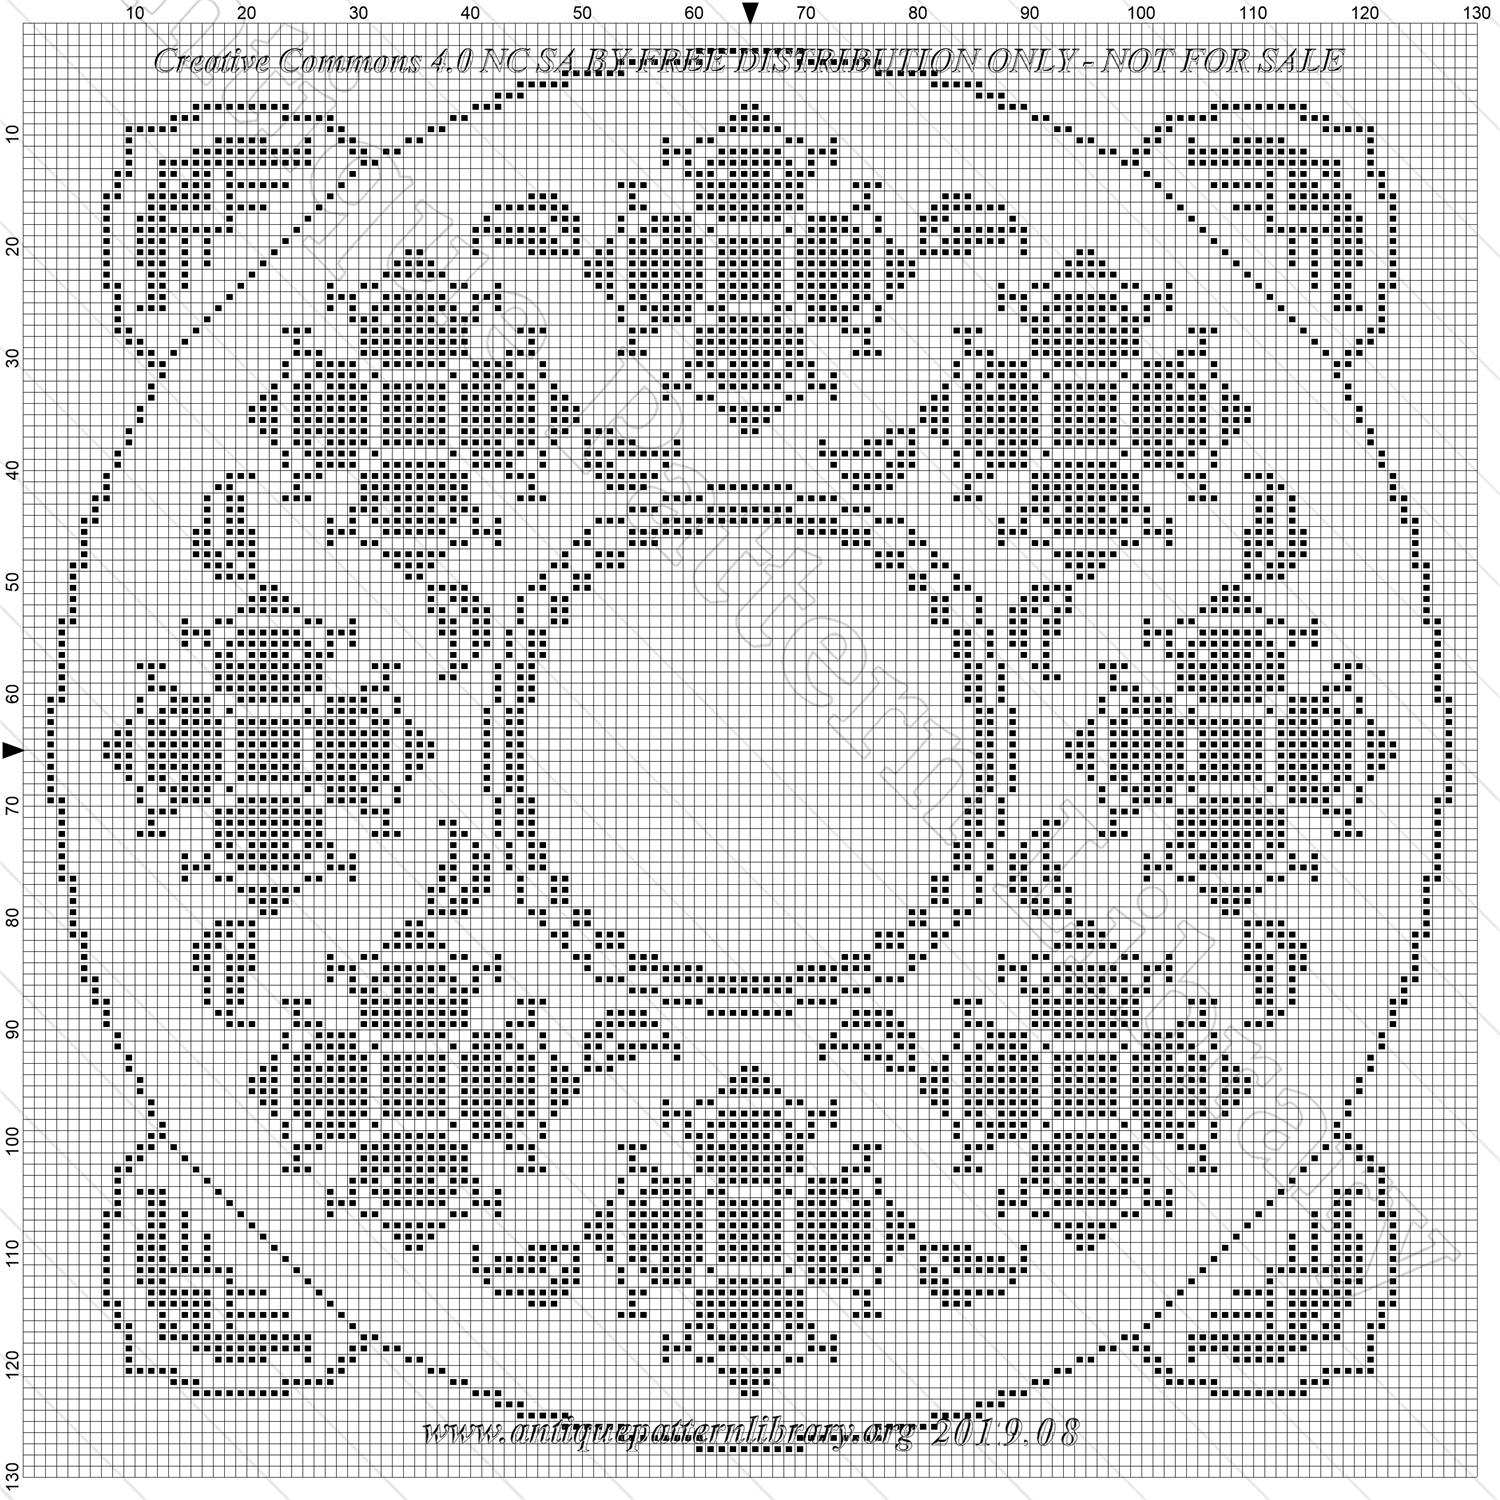 I-LZ002 Filet or embroidery design for a doily or doily edging